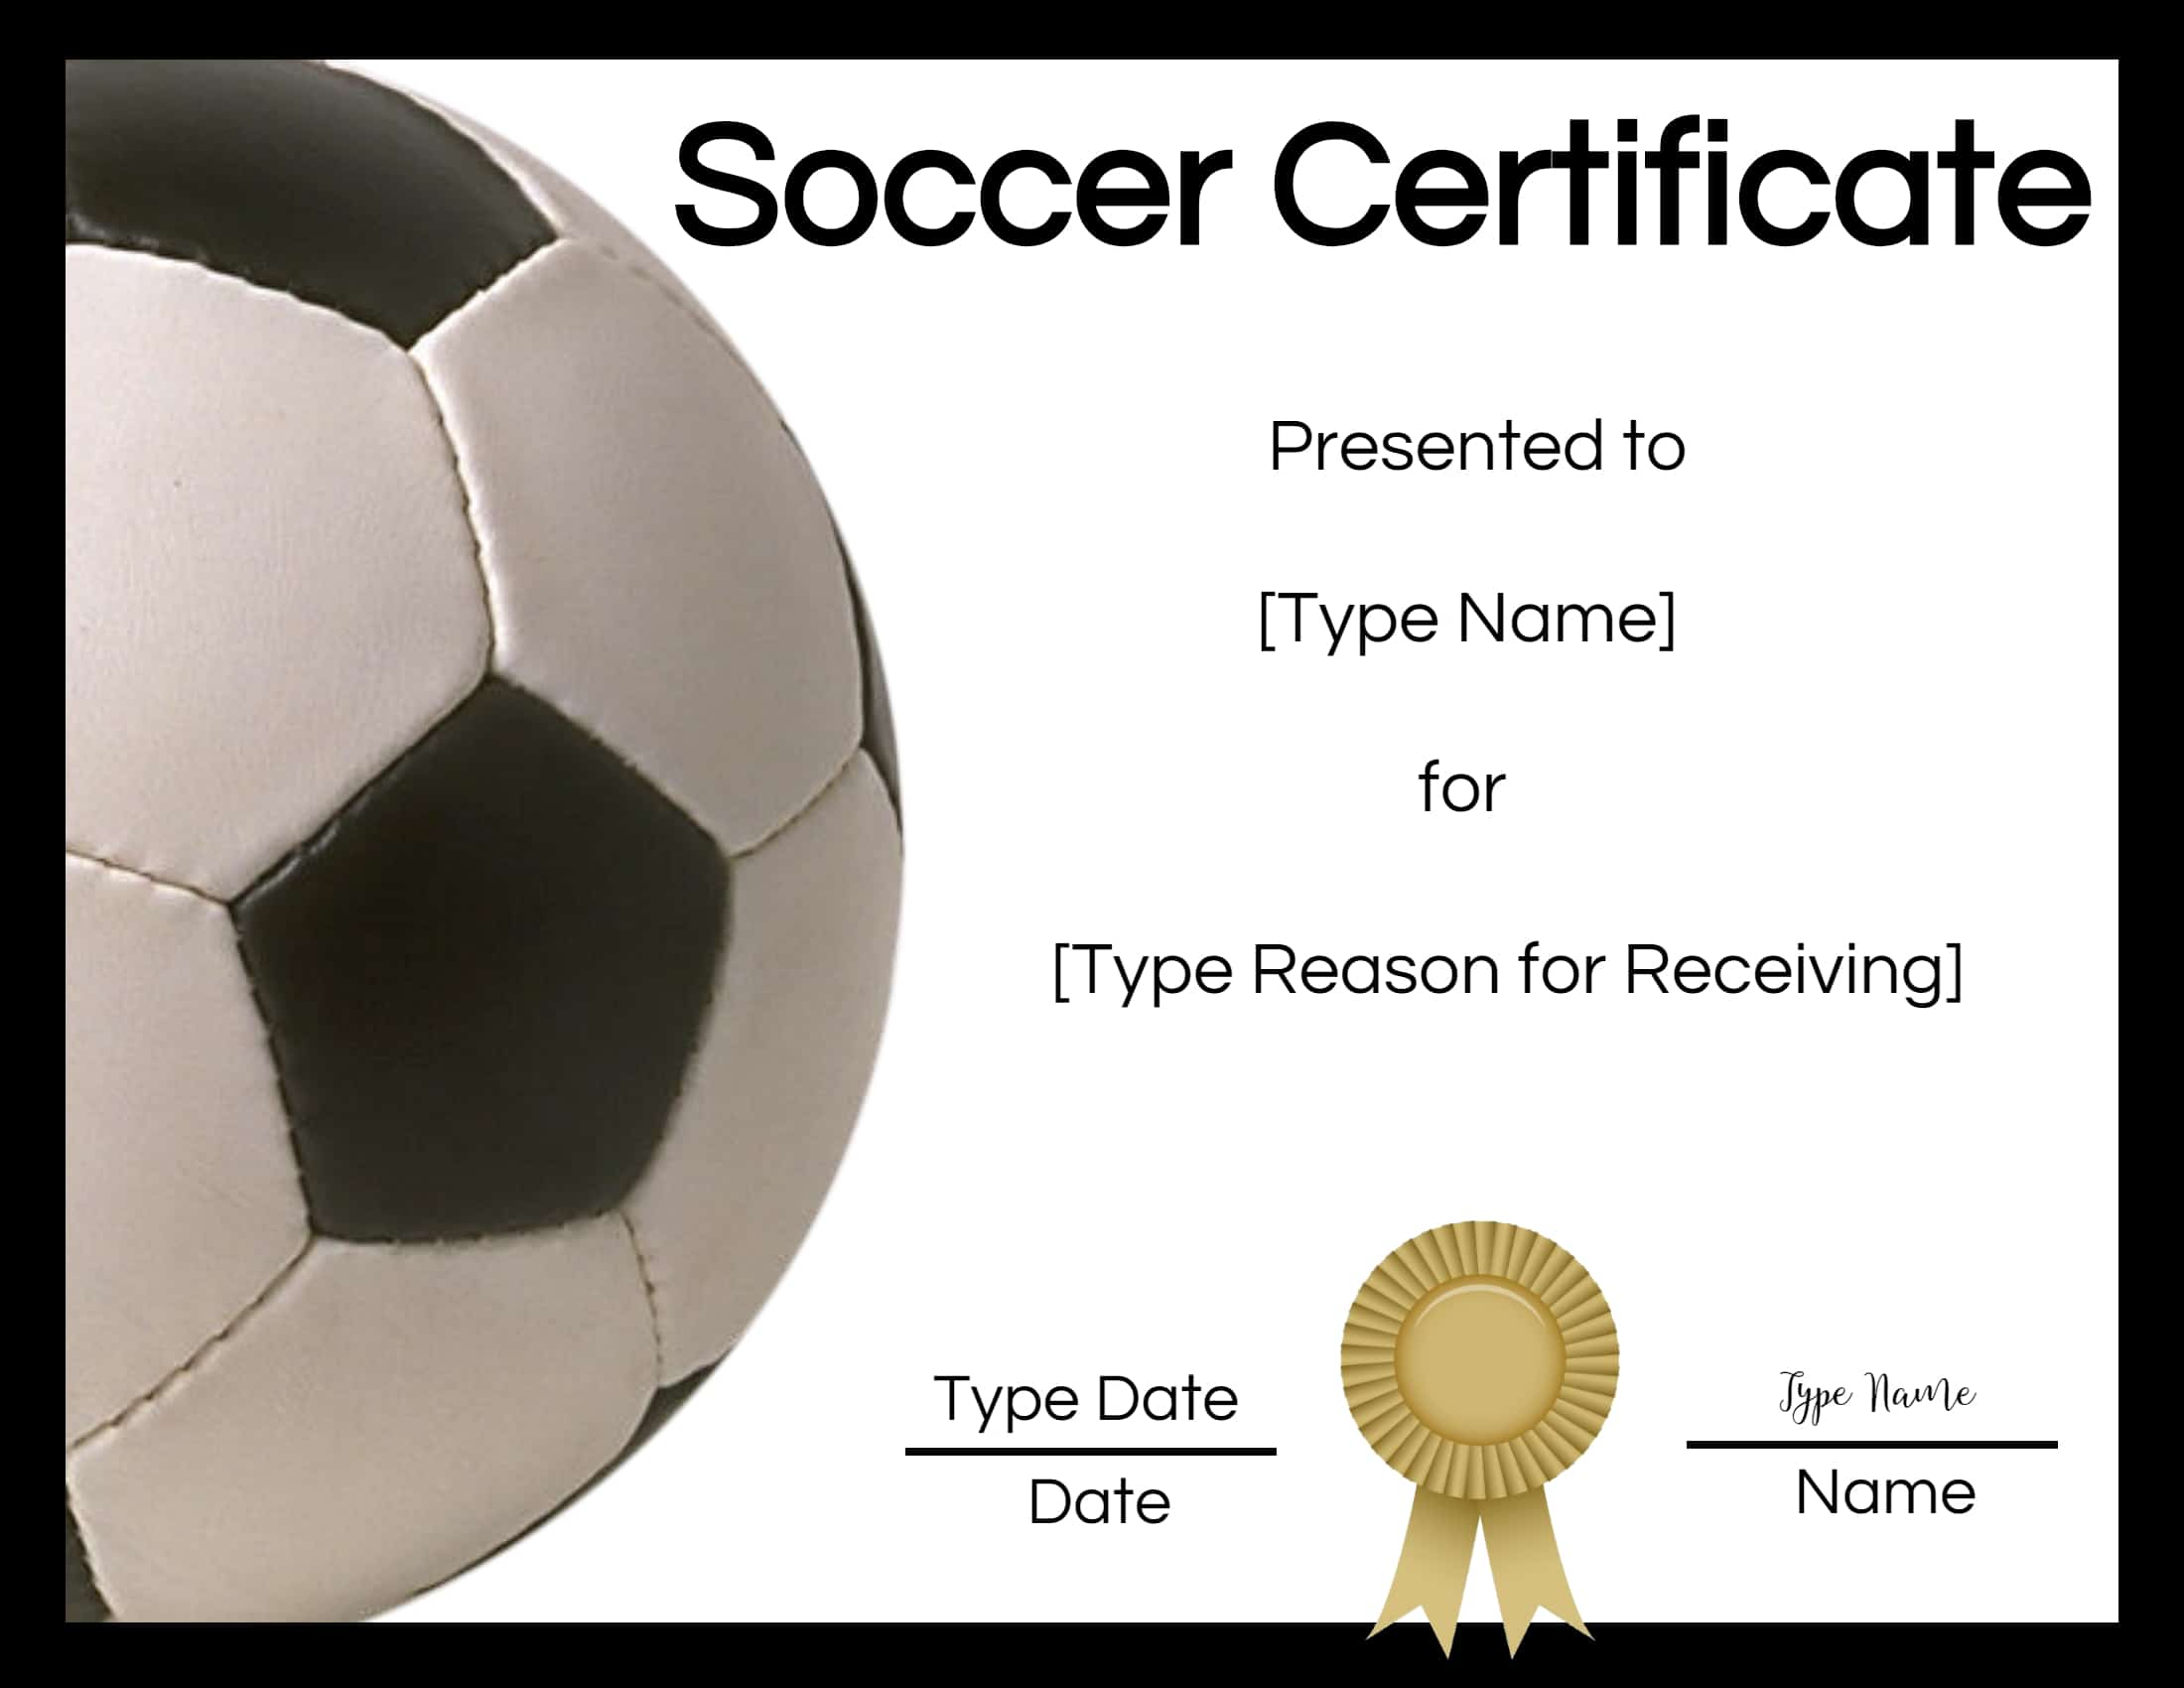 Free Soccer Certificate Maker  Edit Online And Print At Home Intended For Soccer Certificate Template Free